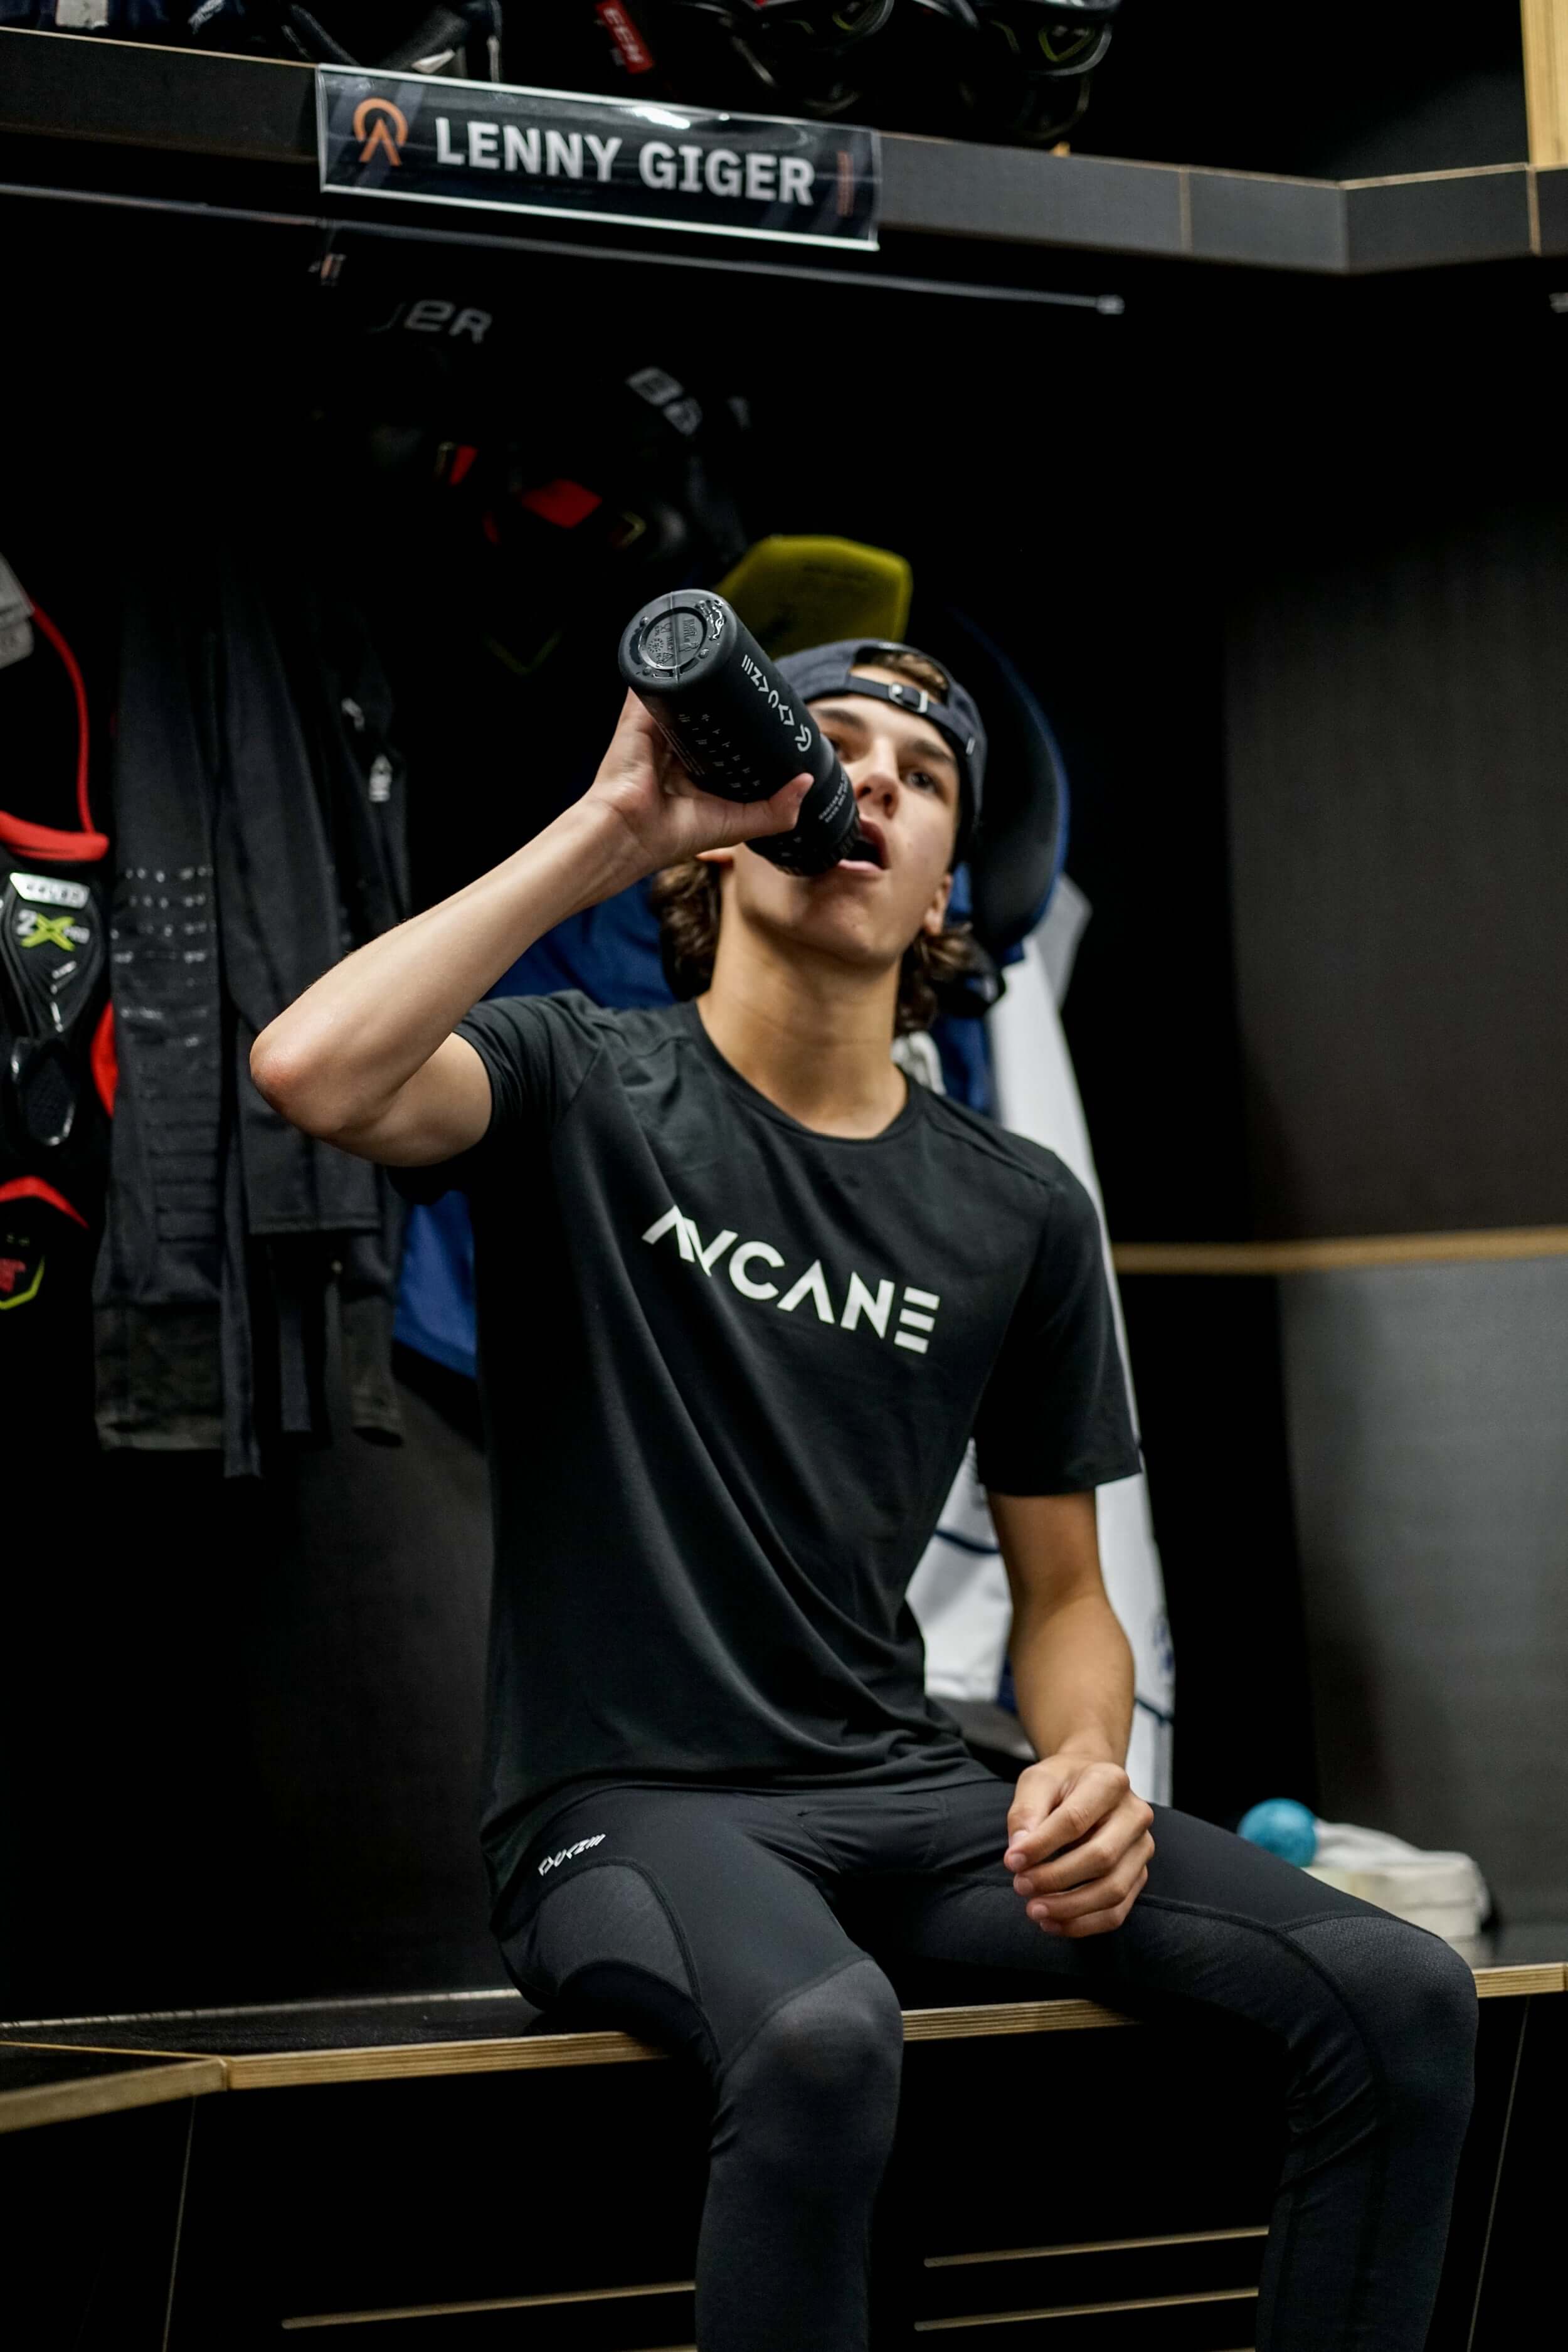 Youth hockey player in locker room drinking from a AYCANE water bottle wearing a short sleeve training t-shirt with a big white AYCANE logo on chest